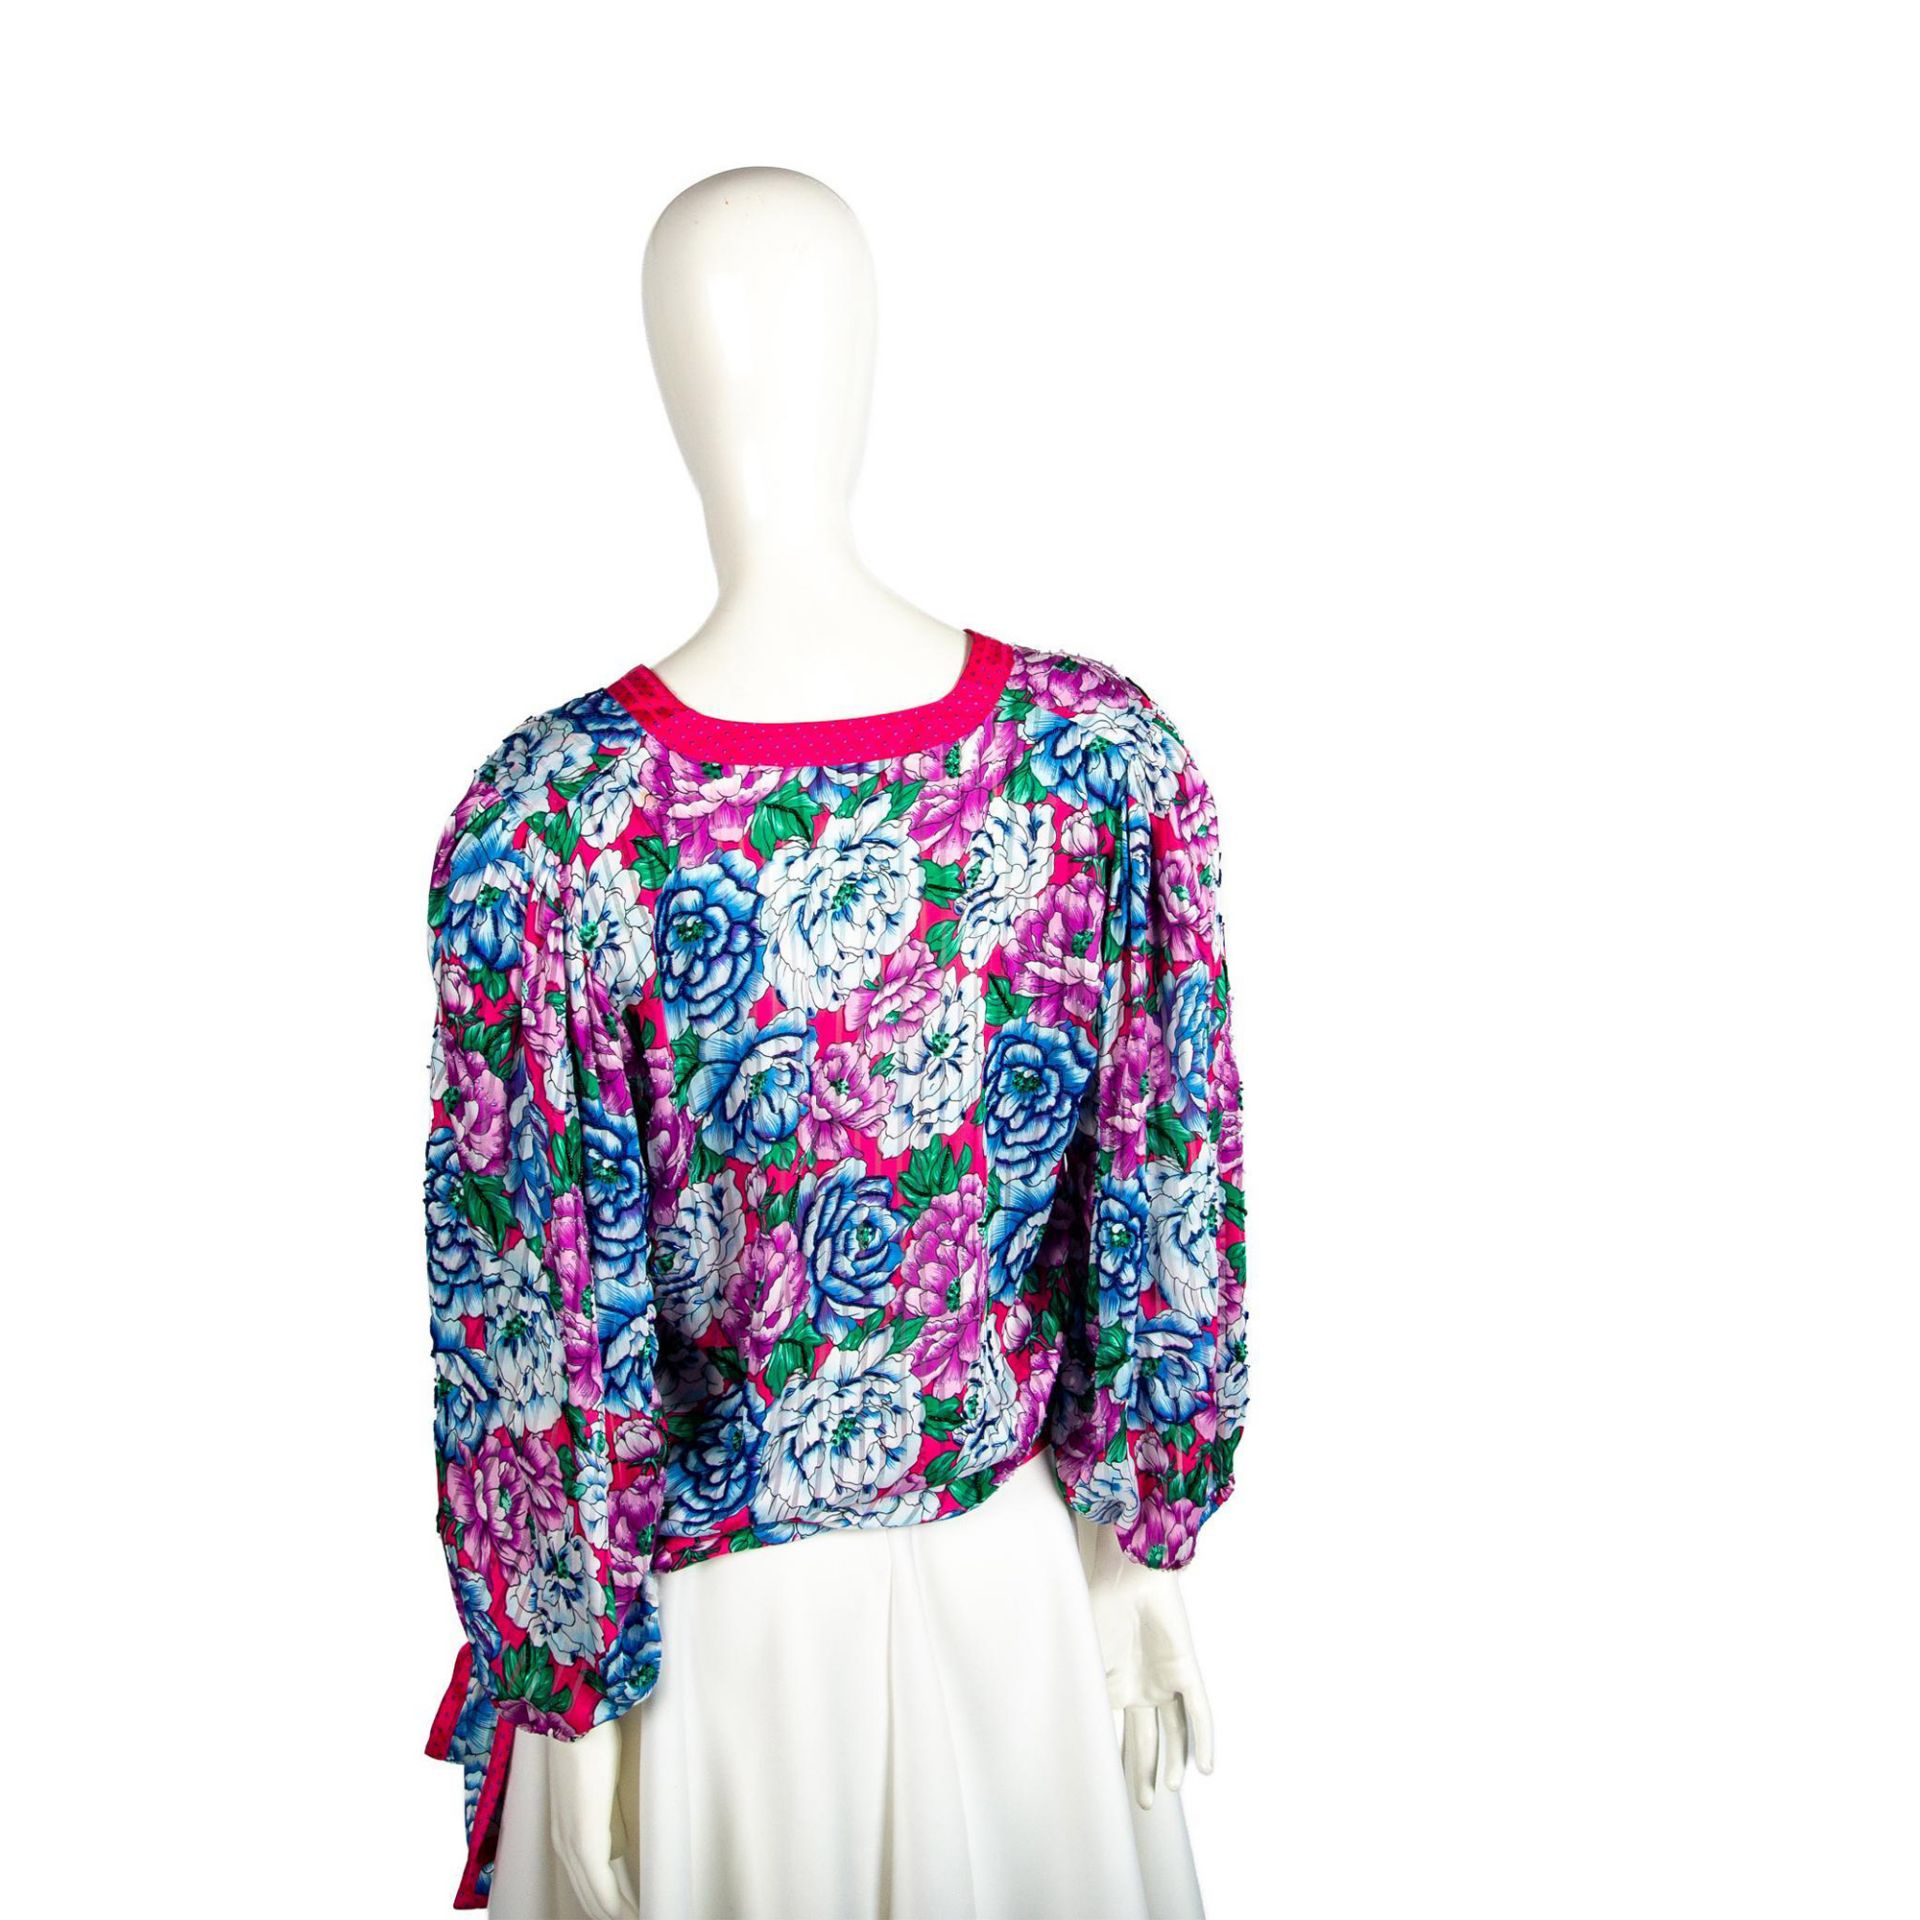 Diane Fres Beaded Floral Blouse - Image 5 of 5